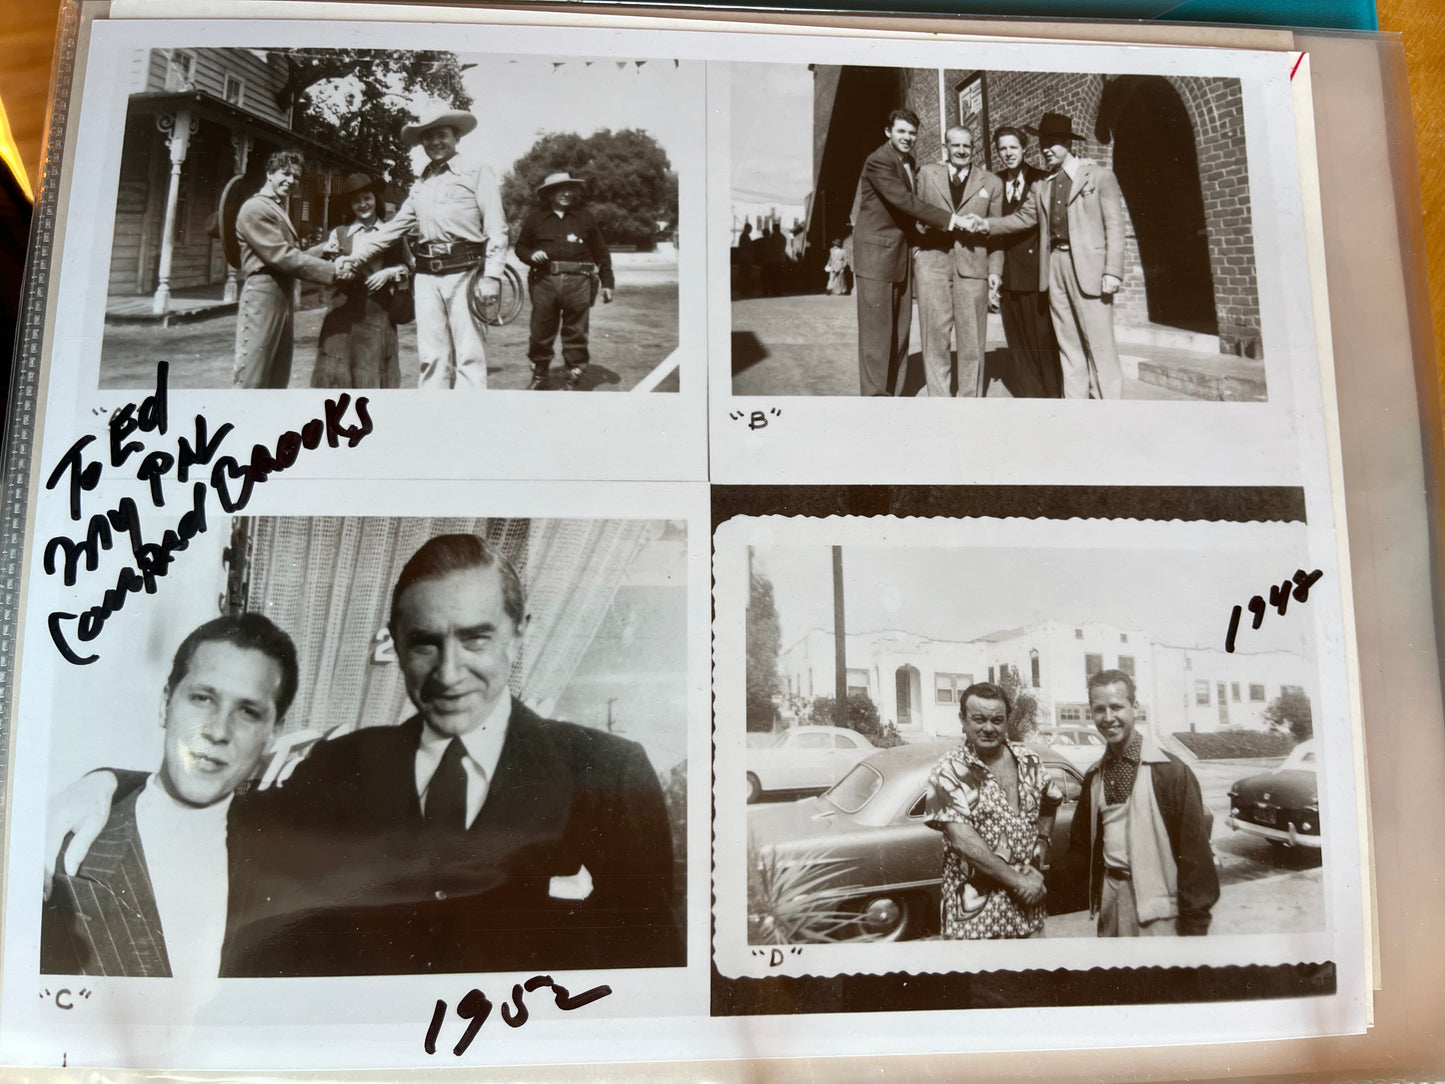 CONRAD BROOKS, Ed Wood actor, Plan 9 from Outer Space, autograph